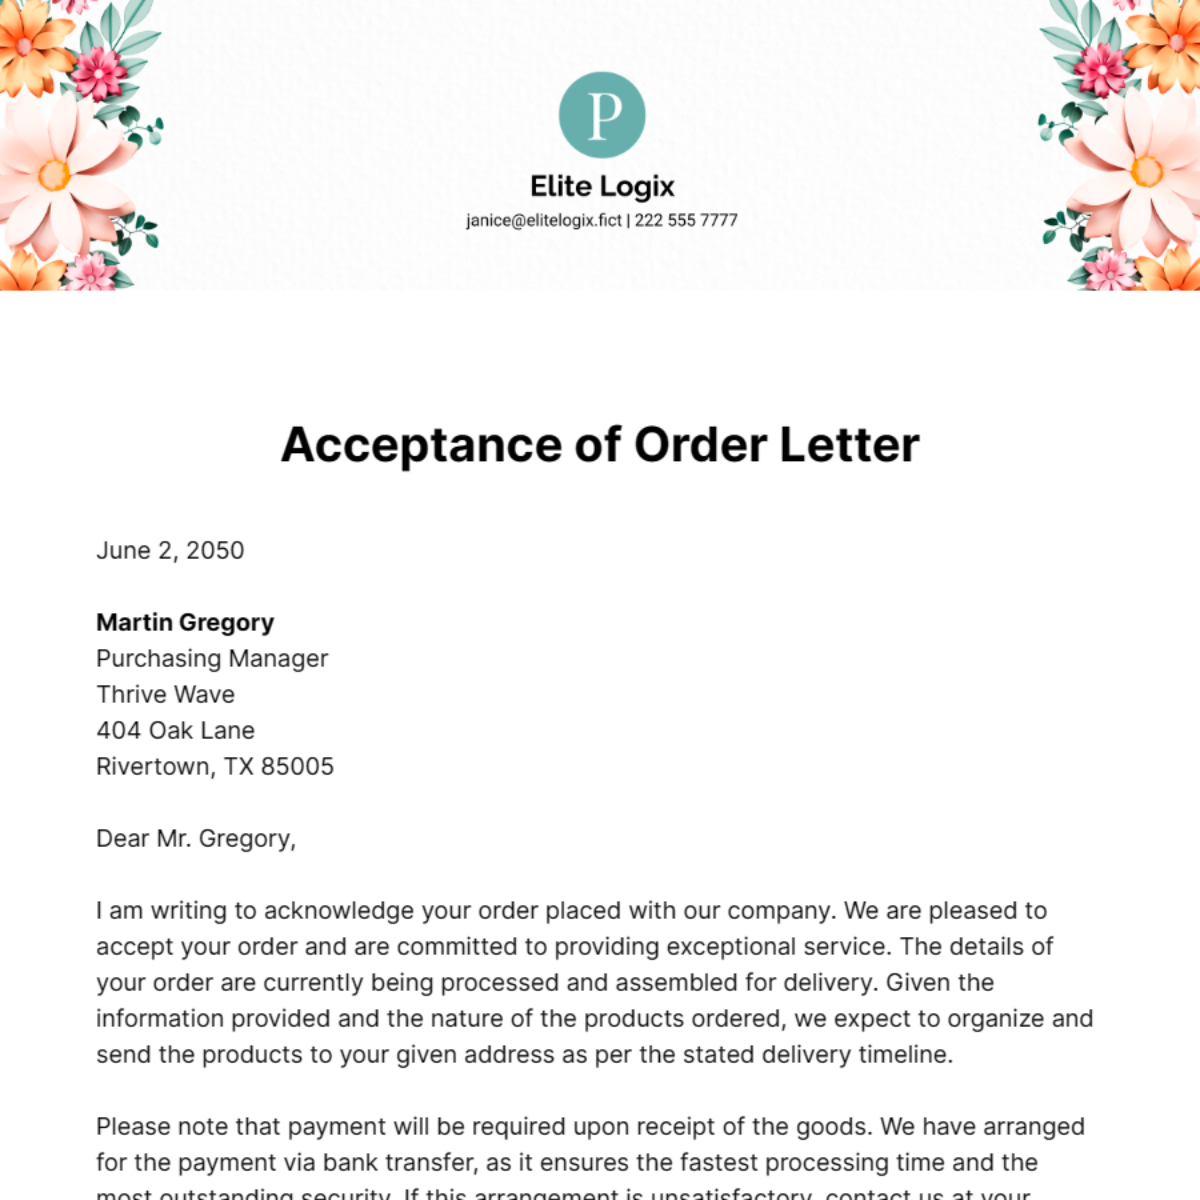 Acceptance of Order Letter Template